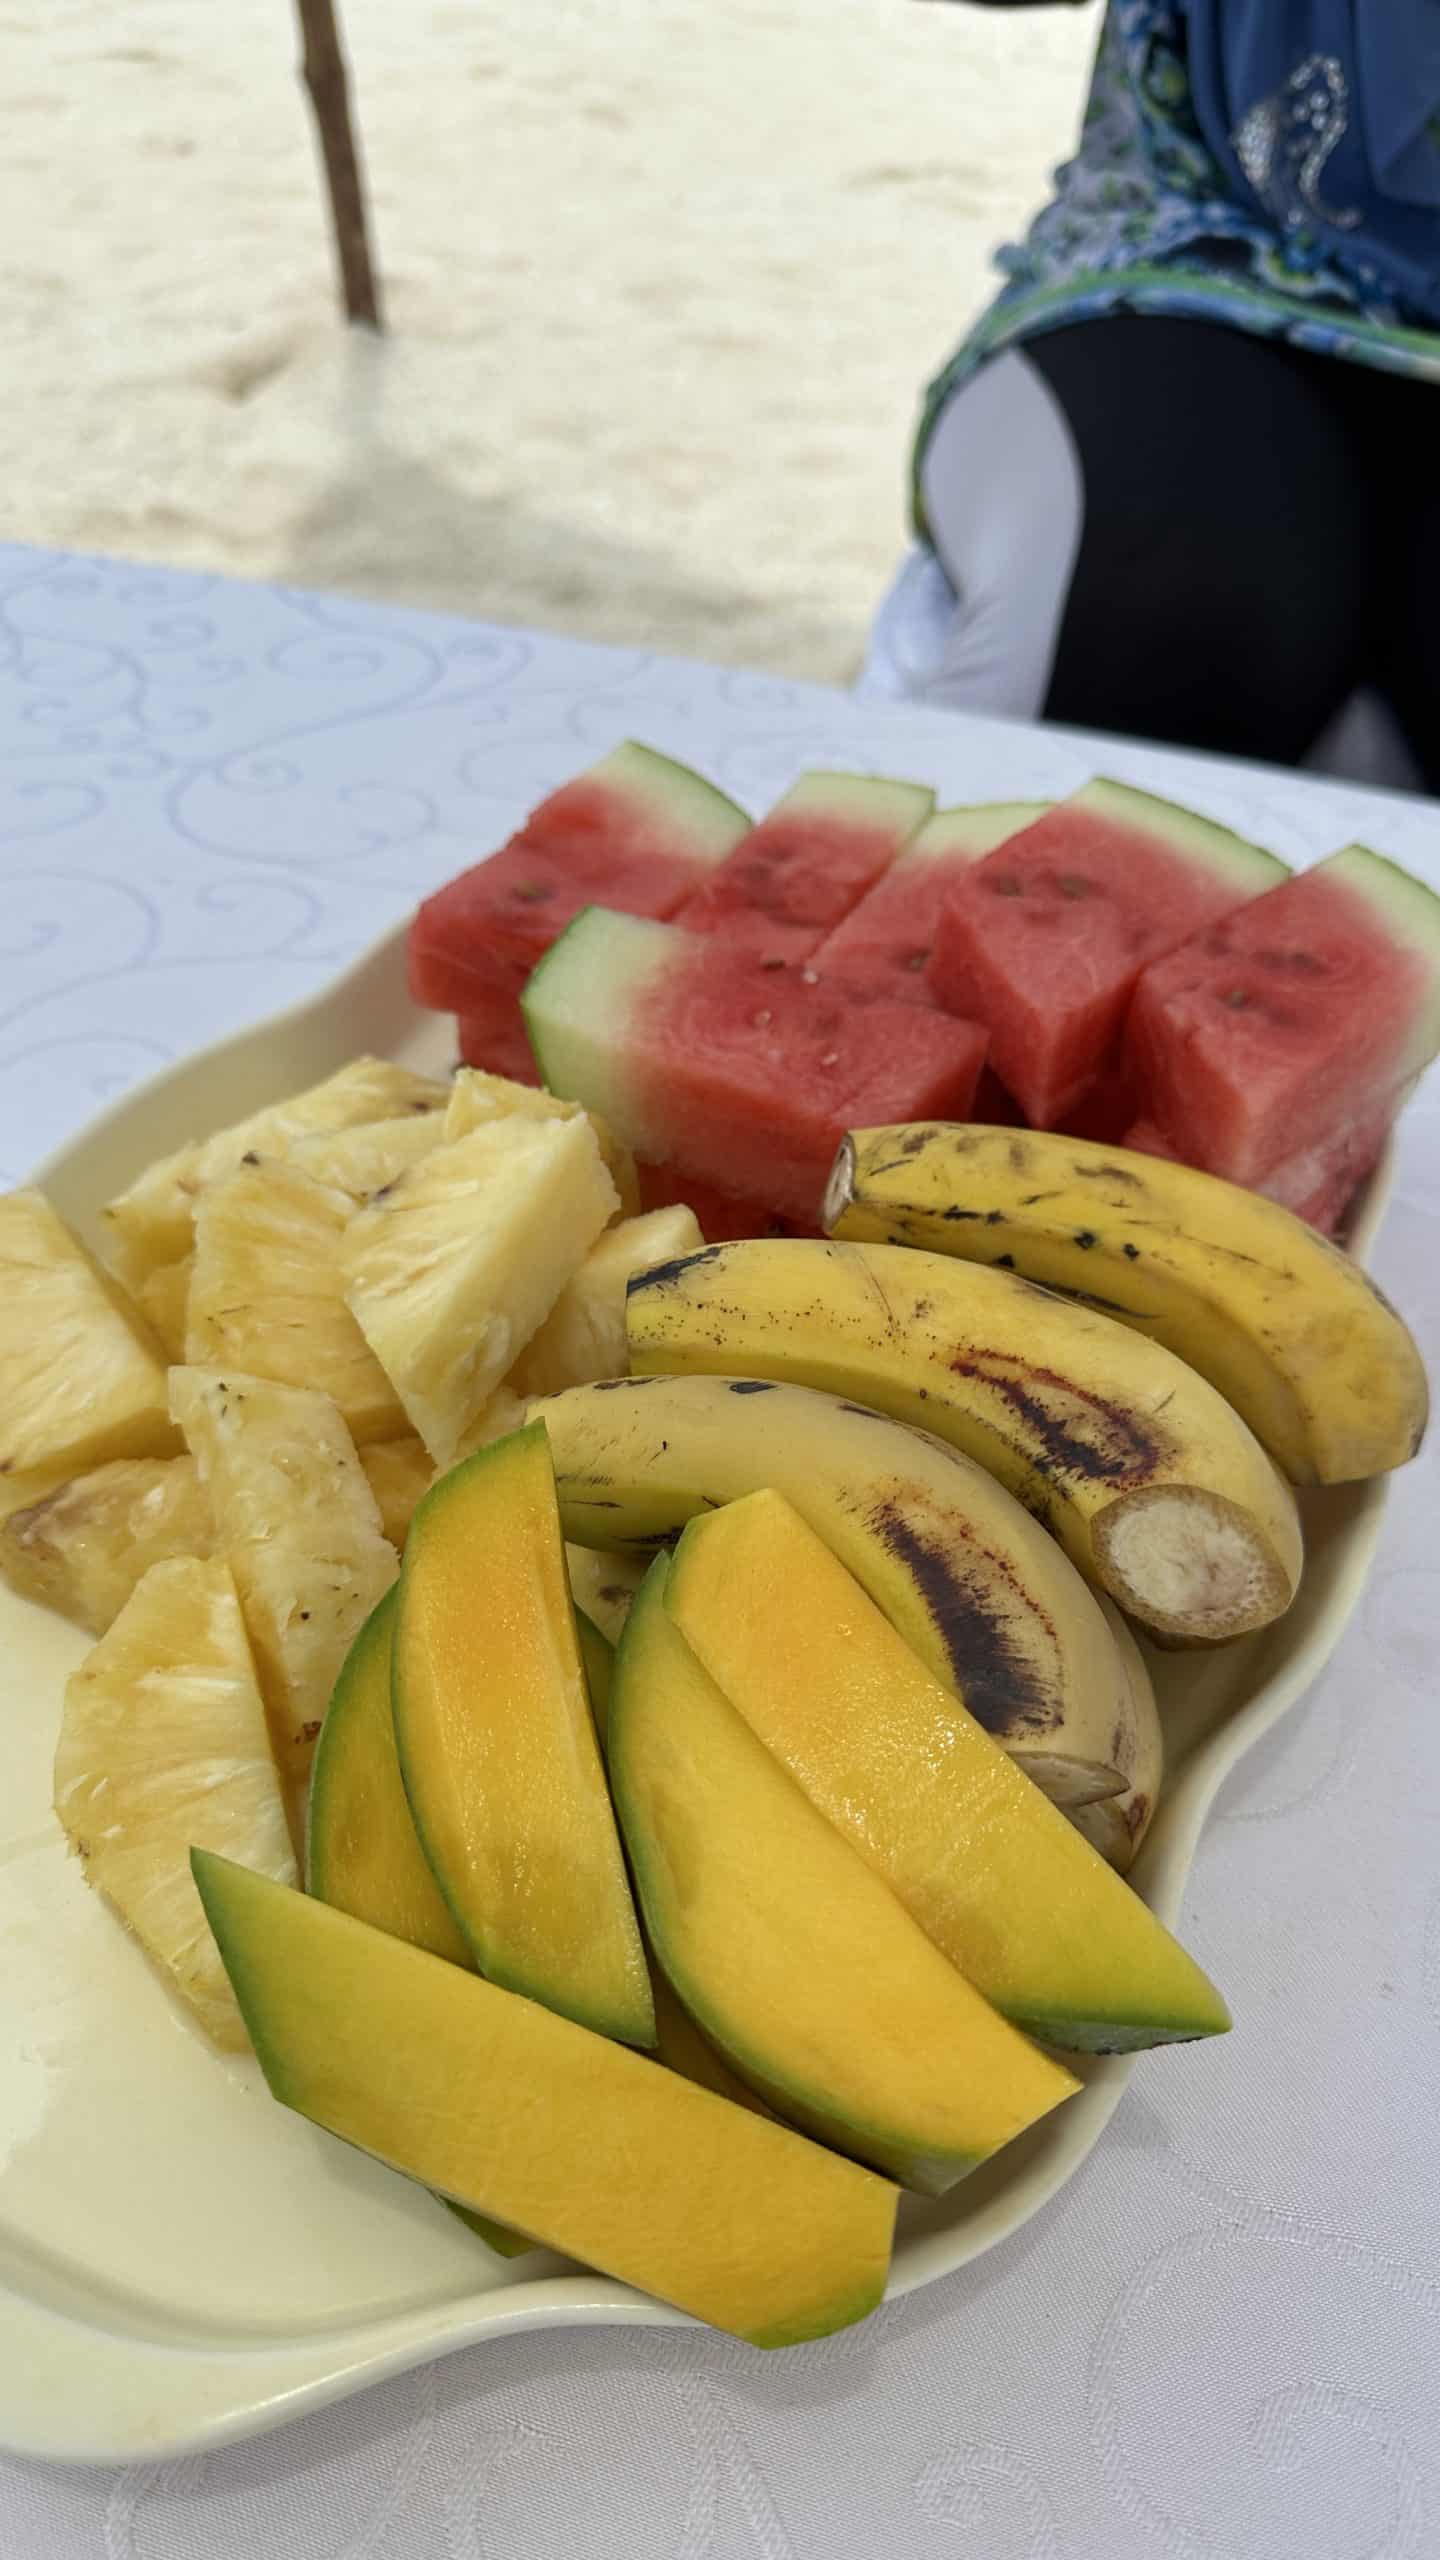 Fruits for our lunch